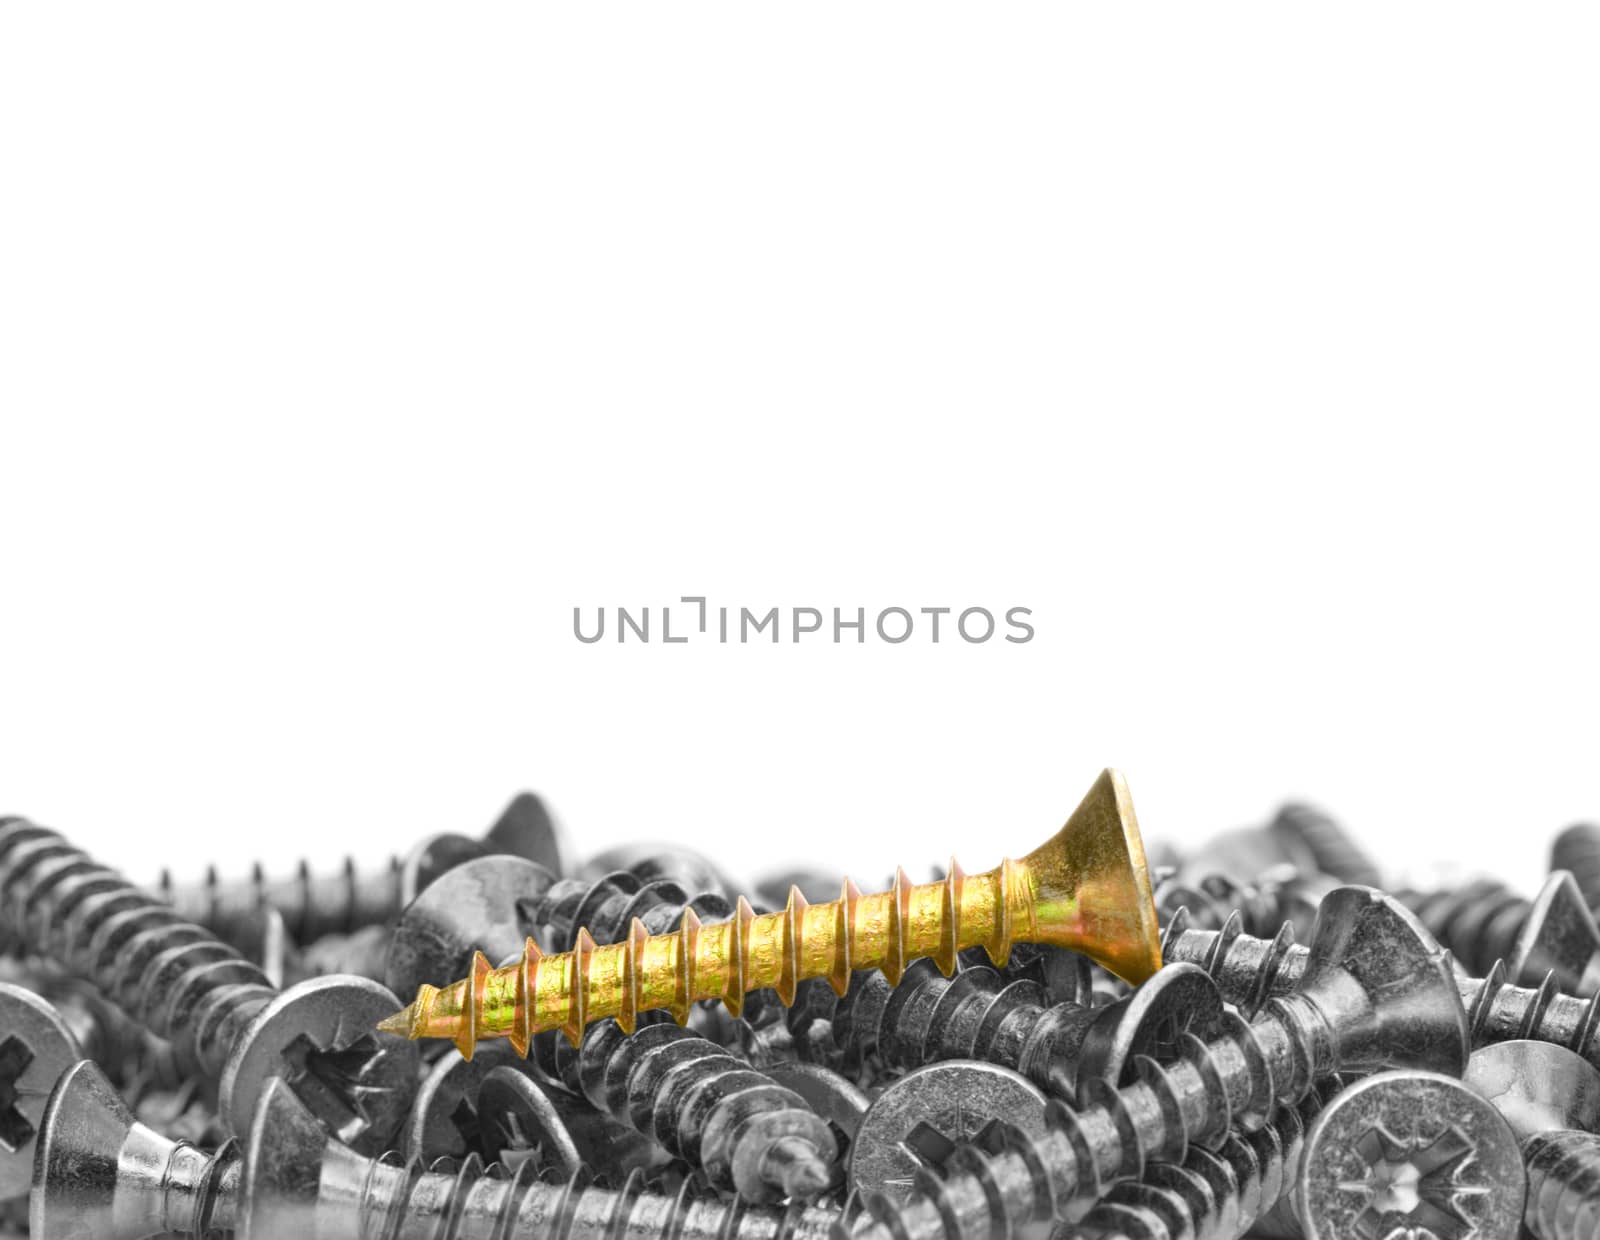 Many black-and-white screws (and one color screw) on a white background.